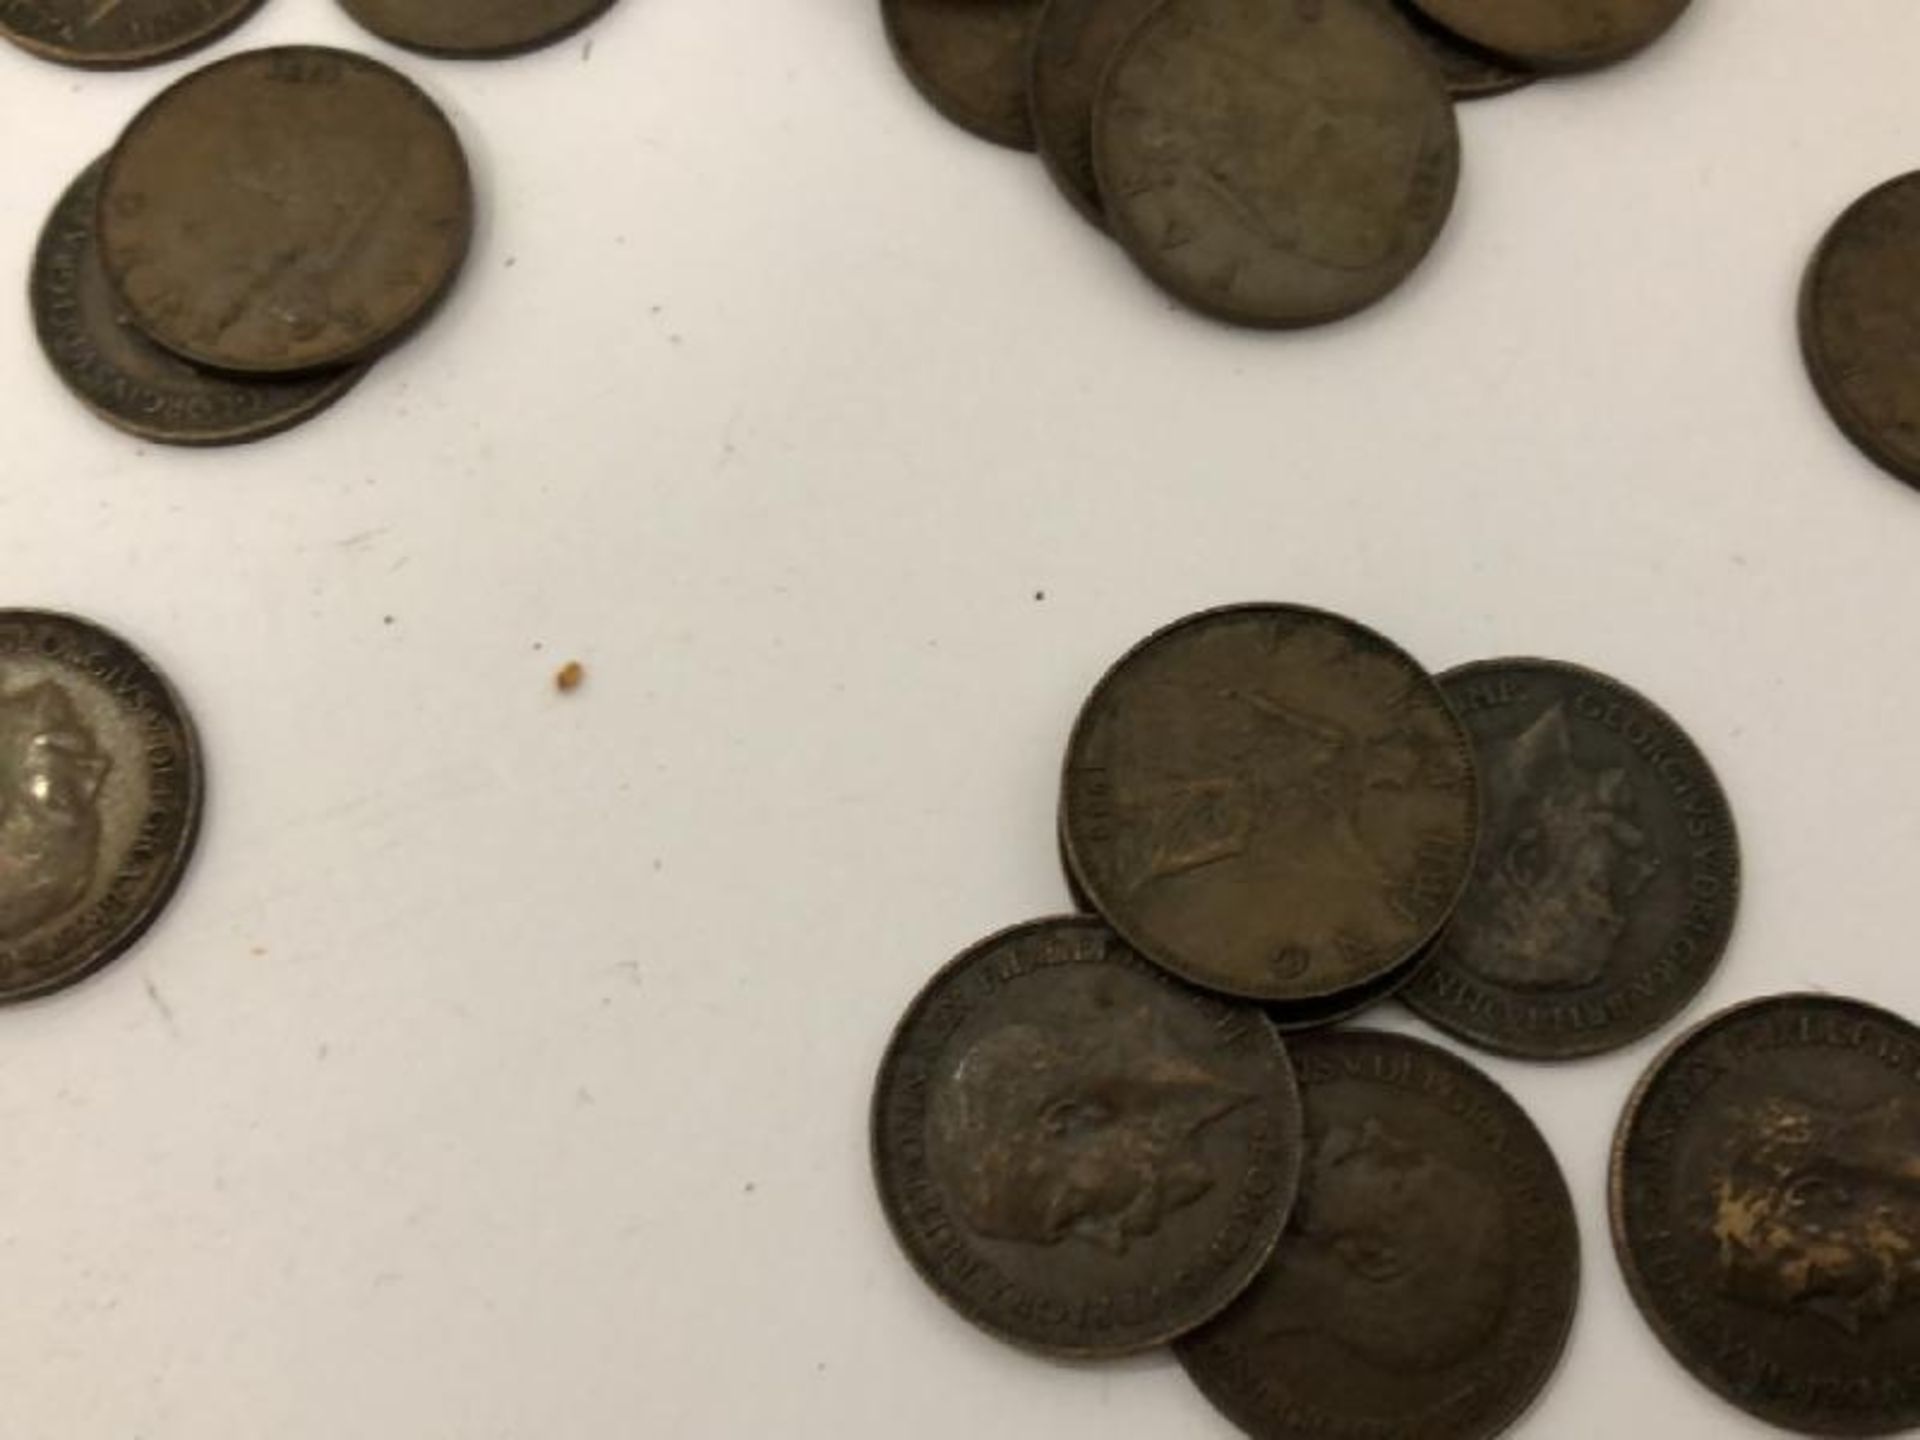 Over one hundred George V coins dated 1913 - 1936 ( some years missing) / AN9 - Image 5 of 5